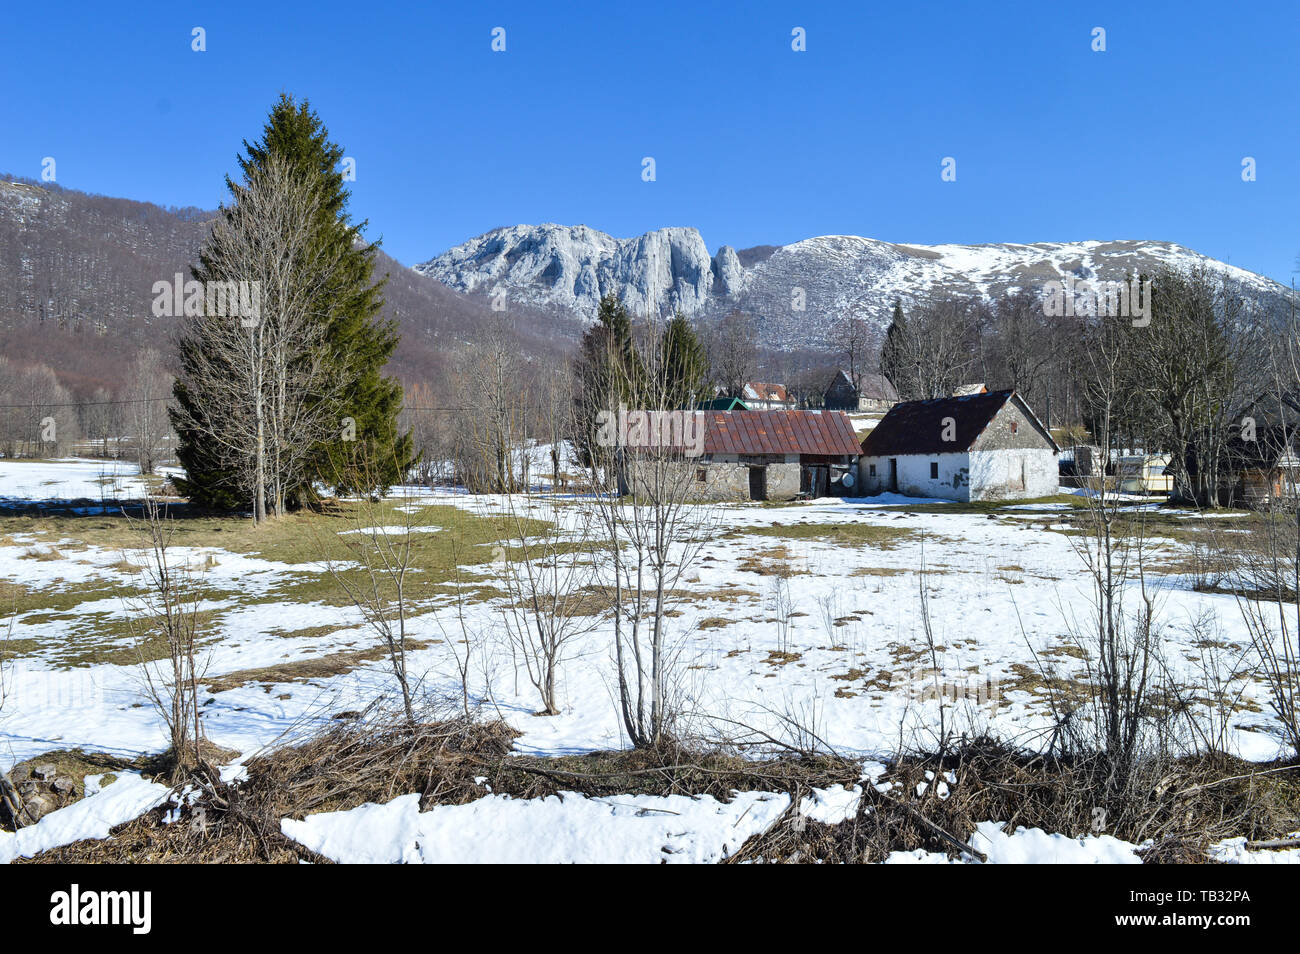 Picturesque mountain village in early spring Stock Photo